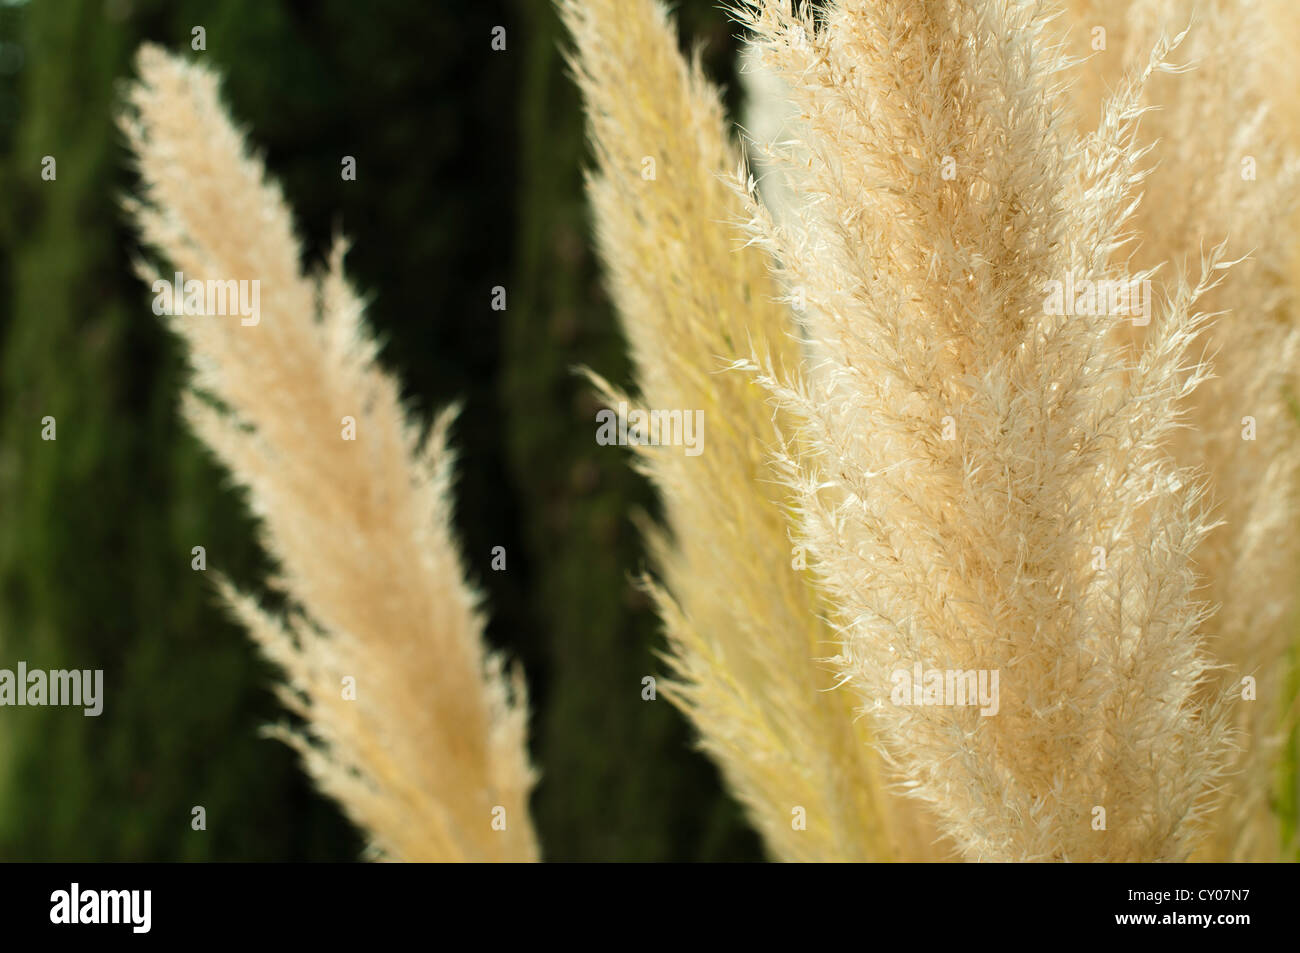 Fluffy Plants High Resolution Stock Photography and Images - Alamy